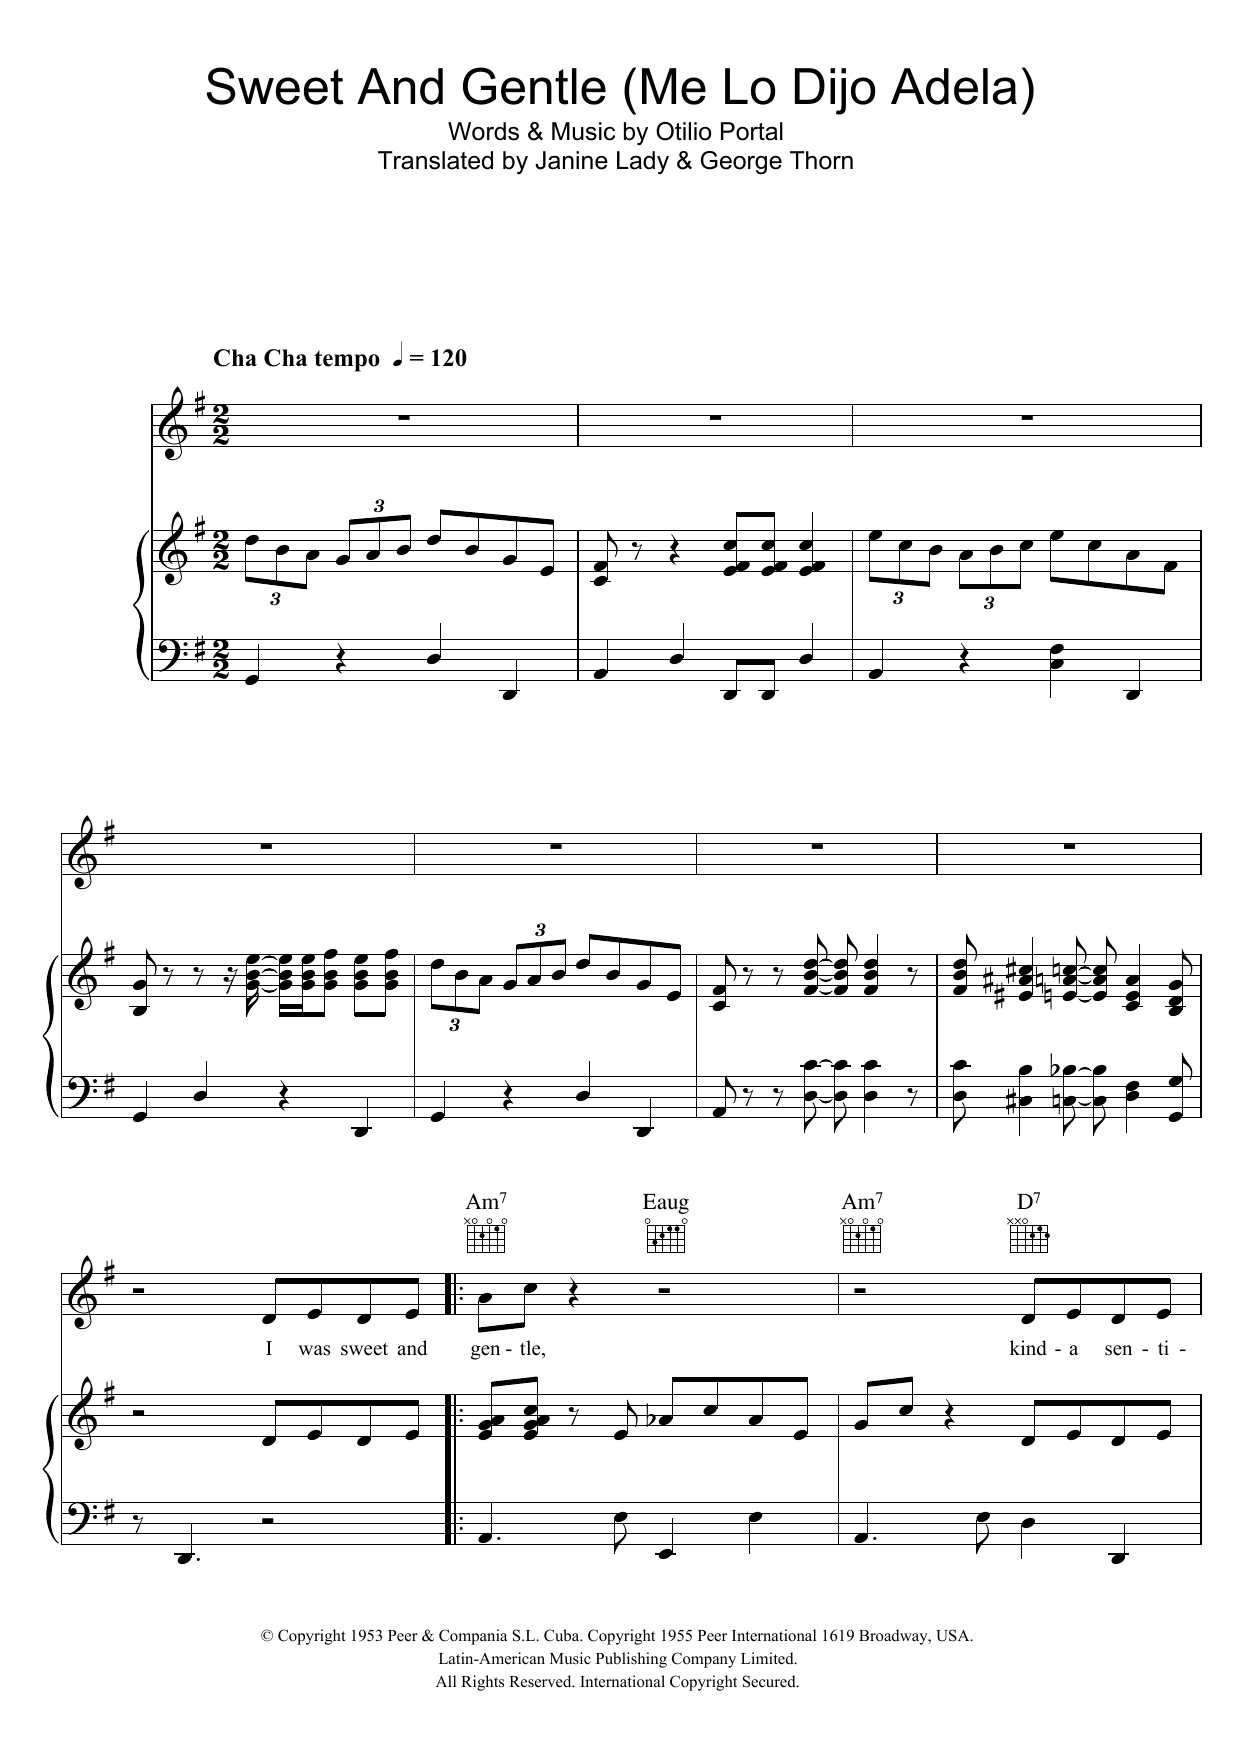 Georgia Gibbs Sweet and Gentle (Me Lo Dijo Adela) sheet music notes and chords. Download Printable PDF.